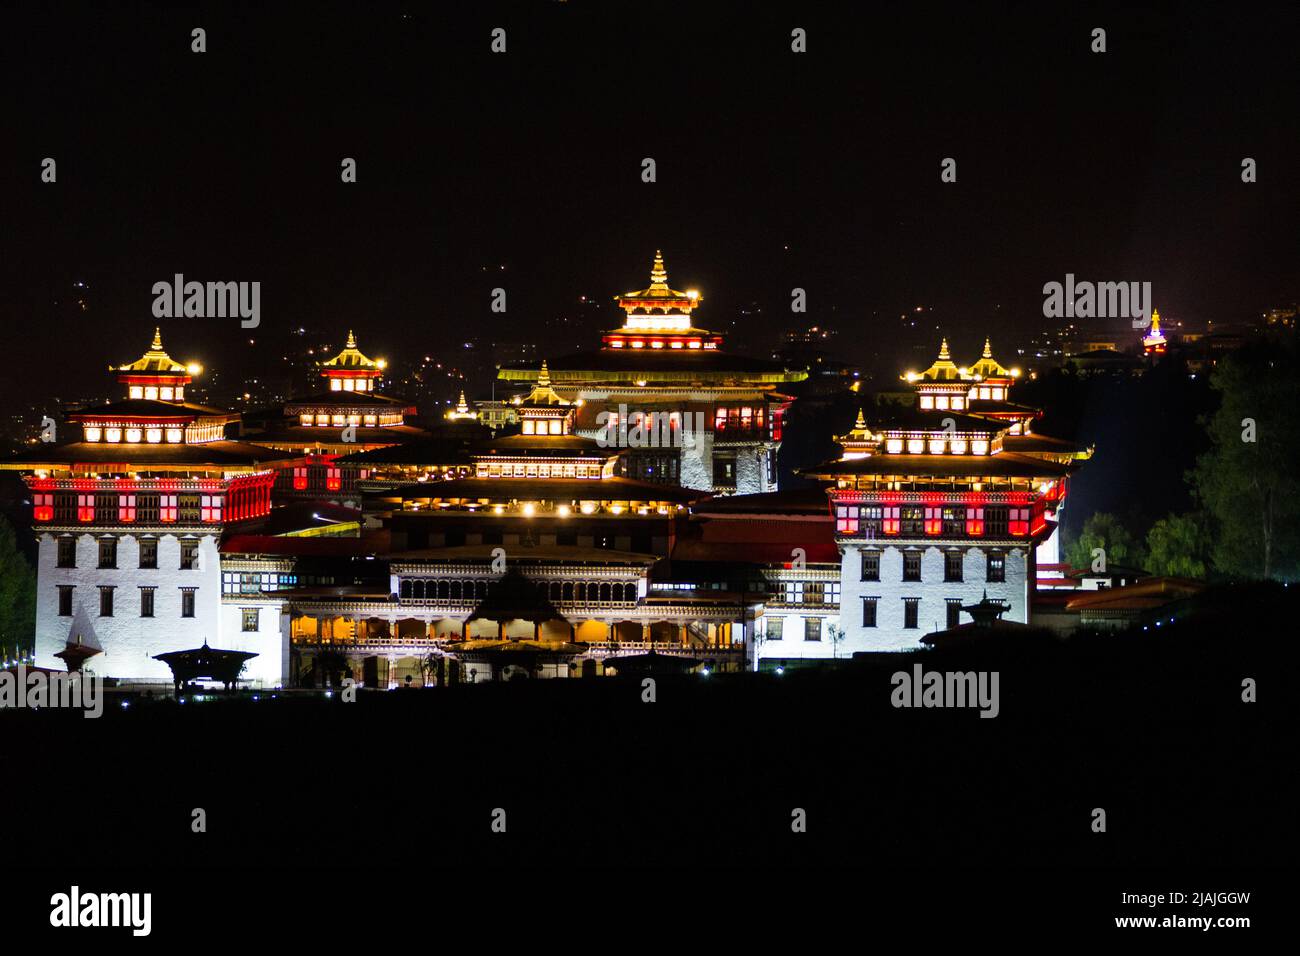 Kingdom of Bhutan's Dechencholing Palace or Royal Palace in the capitol city of Thimphu as seen lit at night Stock Photo